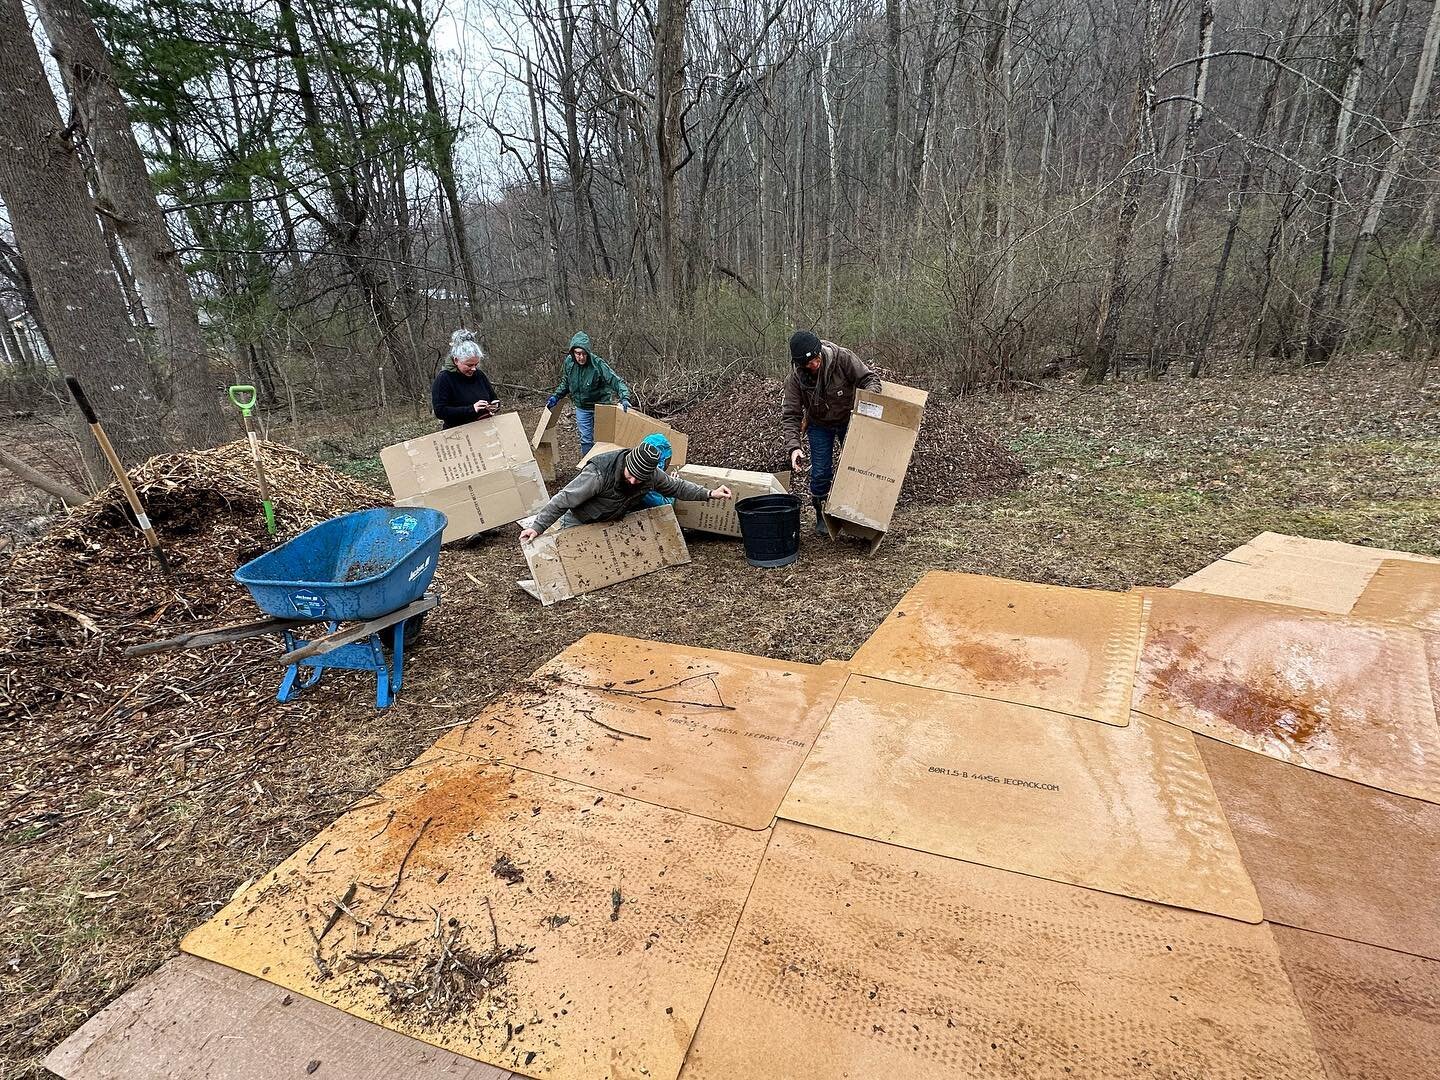 The early, pleasant spring took a day off so we worked in the chilly rain. A small but lively group sheet mulched a new propagation space, then turned over sod to create new beds on a short but steep slope. Lilia came through with a delicious hot mea